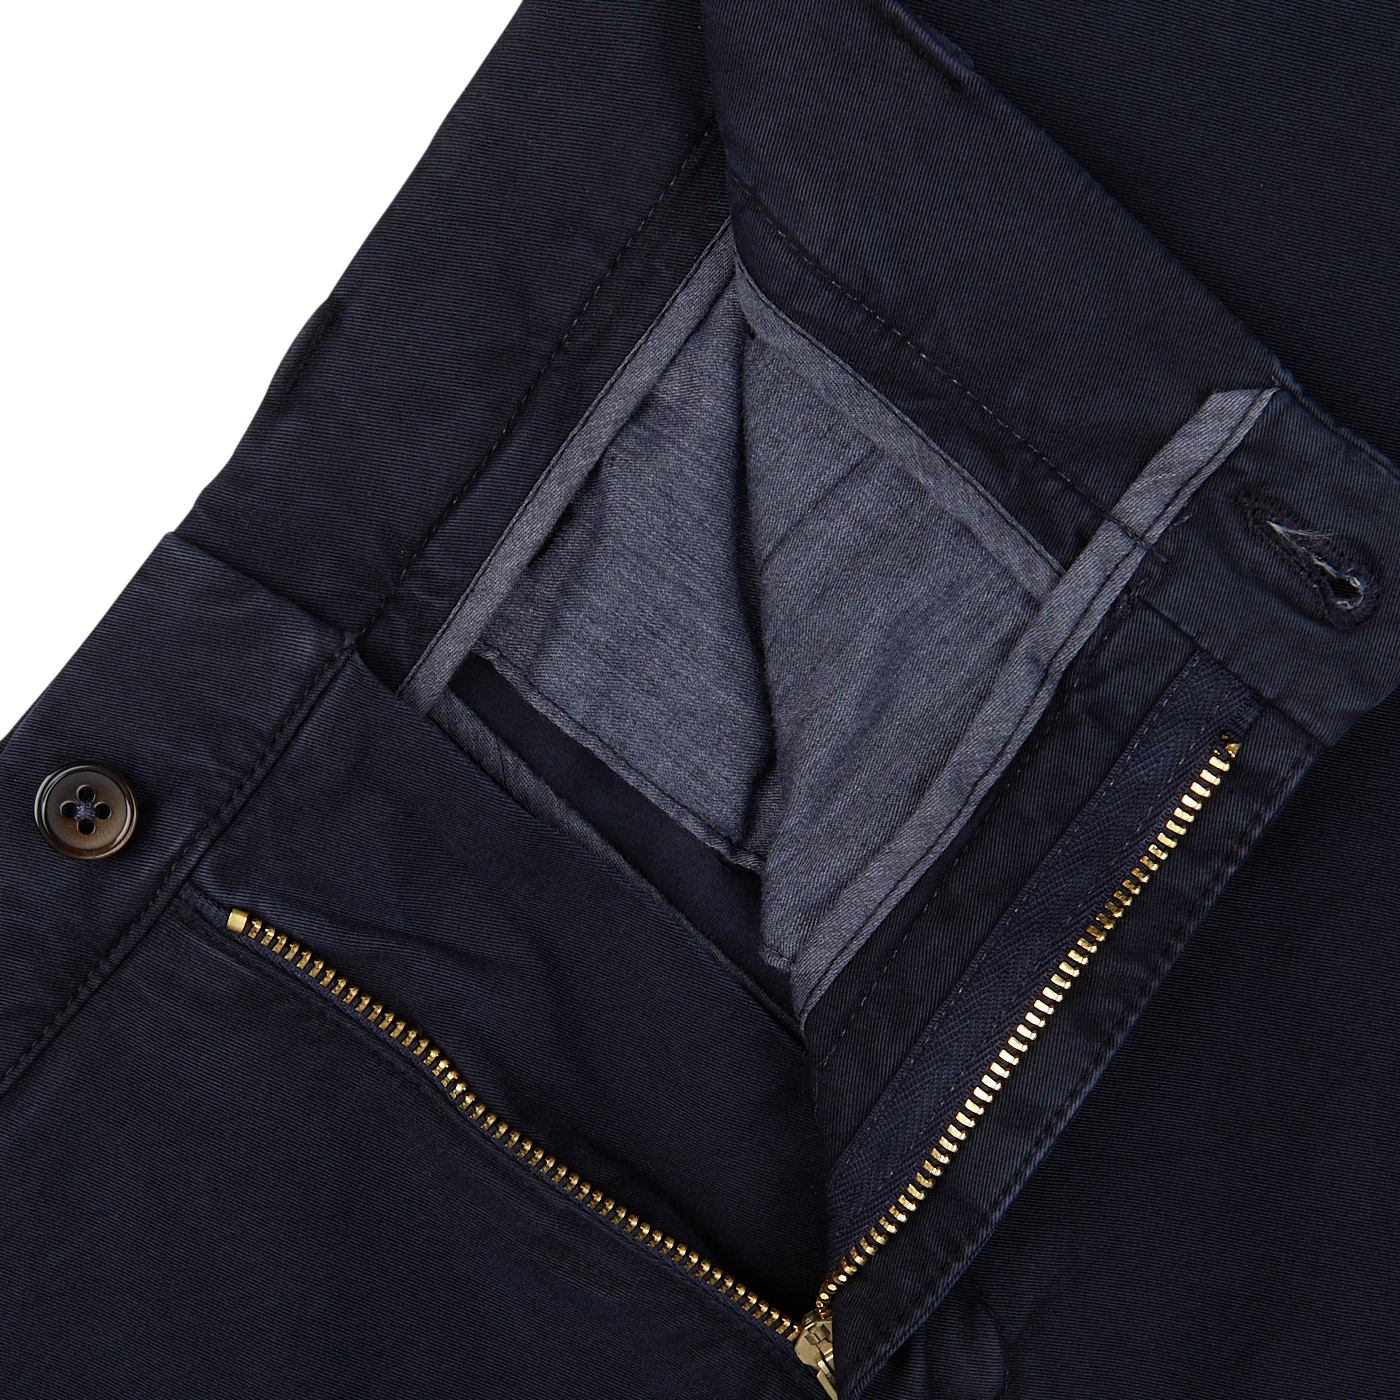 Close-up of Berwich navy blue cotton stretch bermuda shorts featuring a zipper pocket detail and buttoned fastening, perfect for a summer vacation.